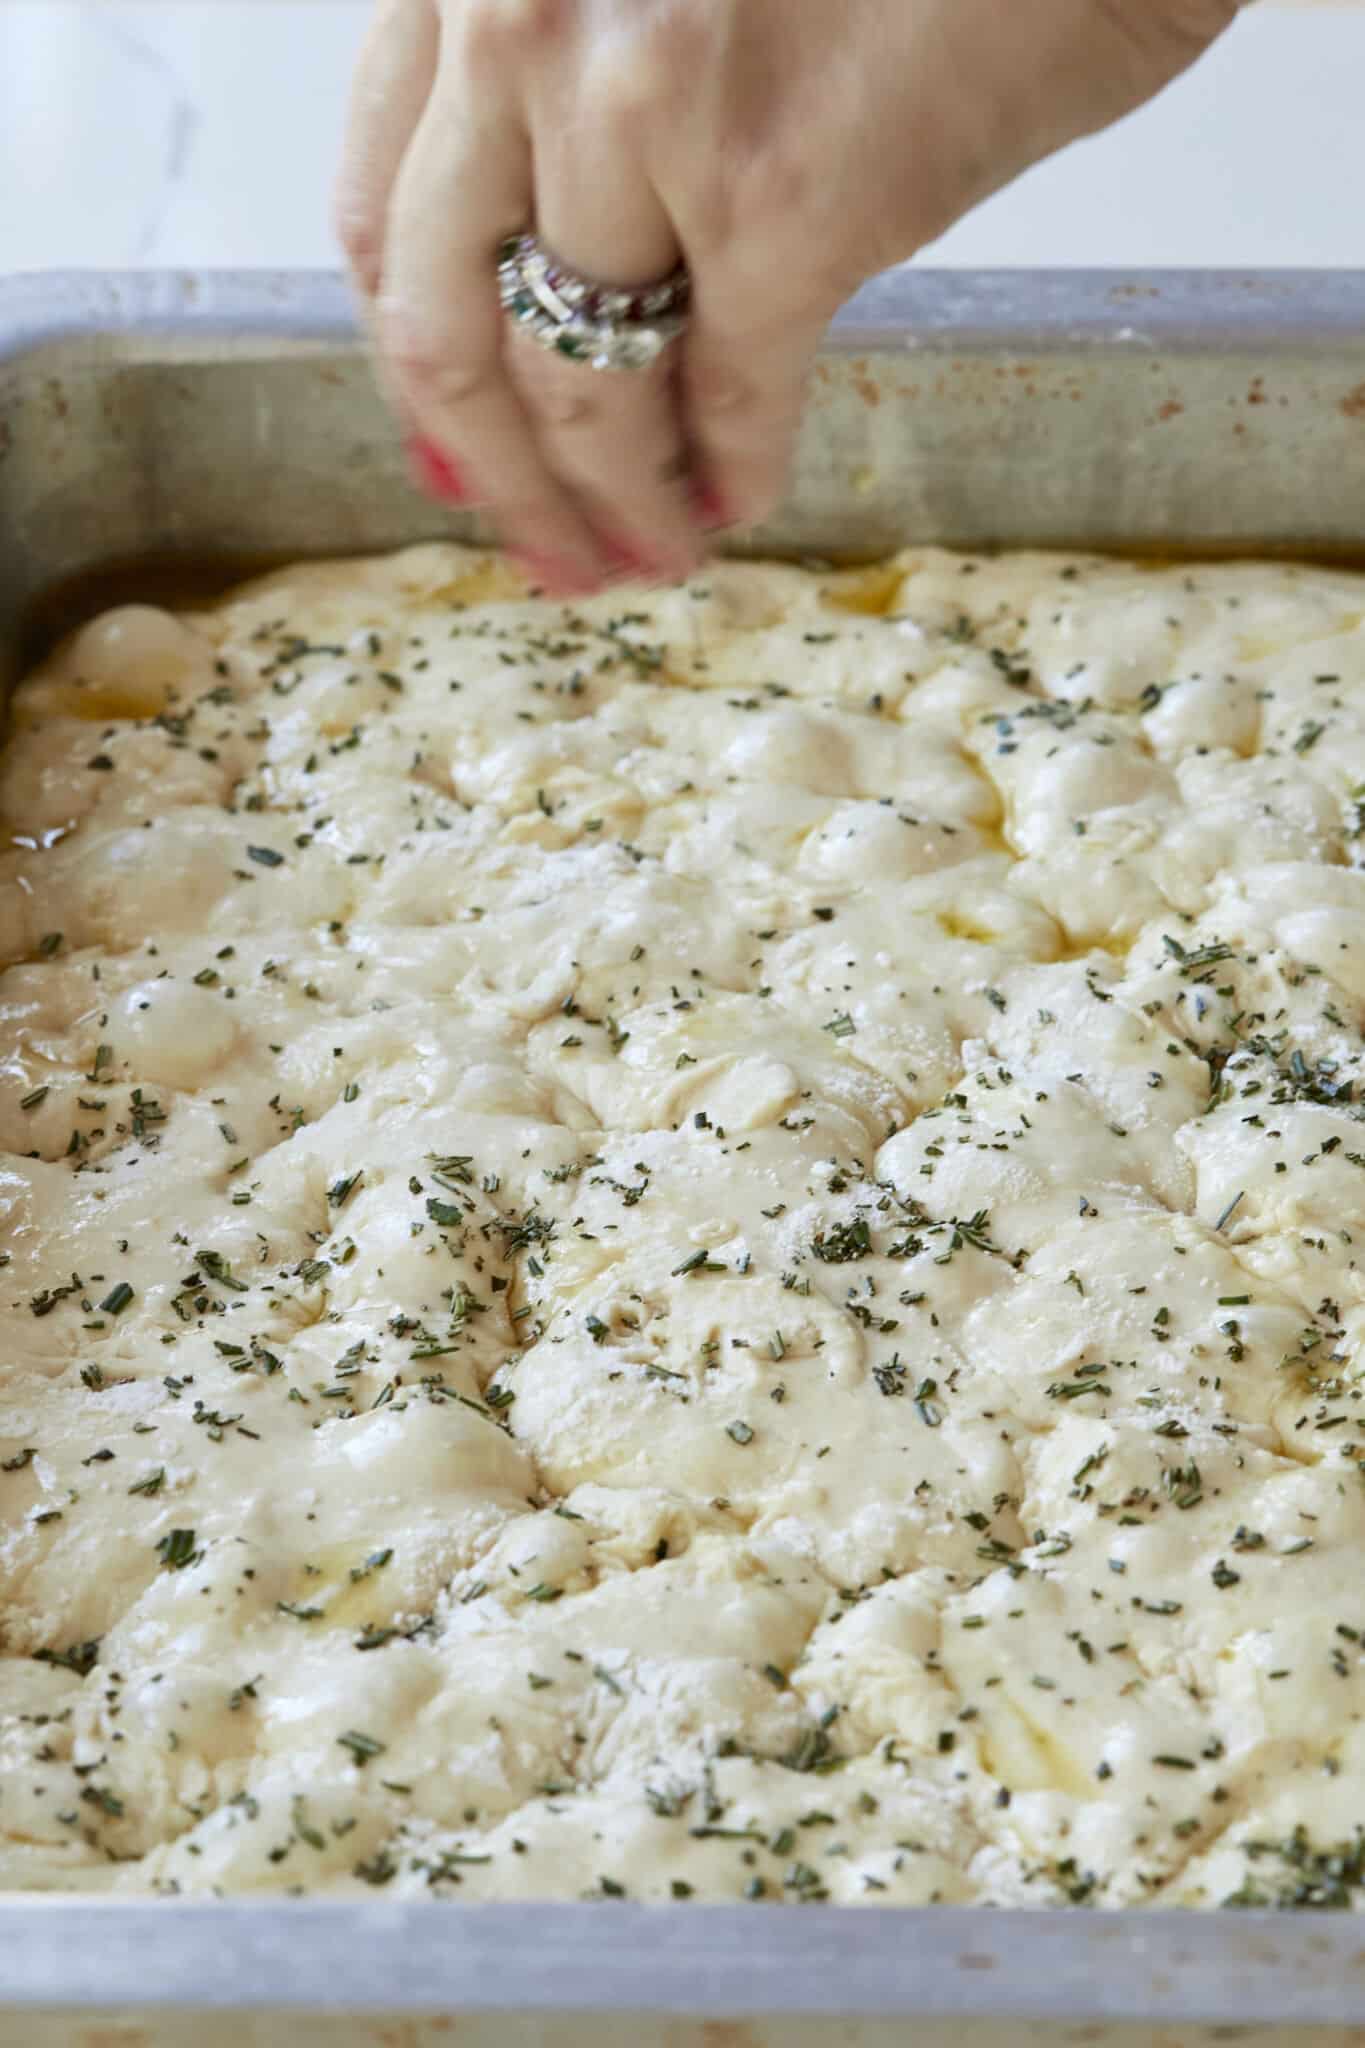 Drizzle the dough with the remaining 2 tablespoons of olive oil and top with chopped rosemary.